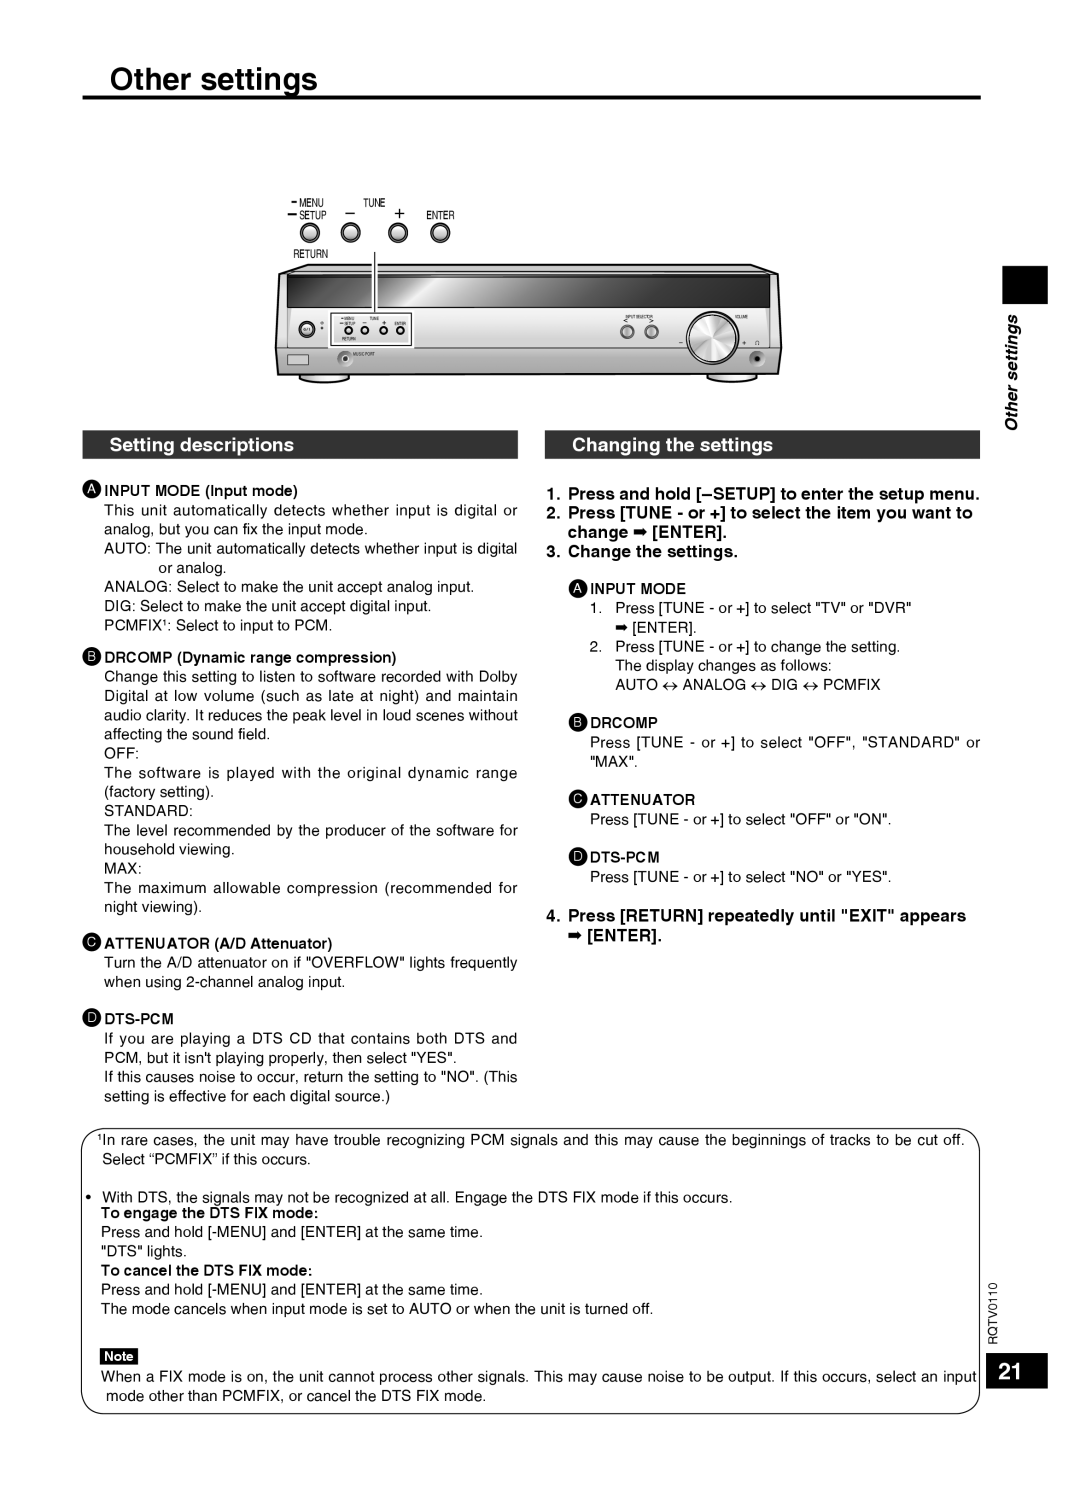 Panasonic SC-HT60 specifications Setting descriptions, Changing the settings, Other settings 